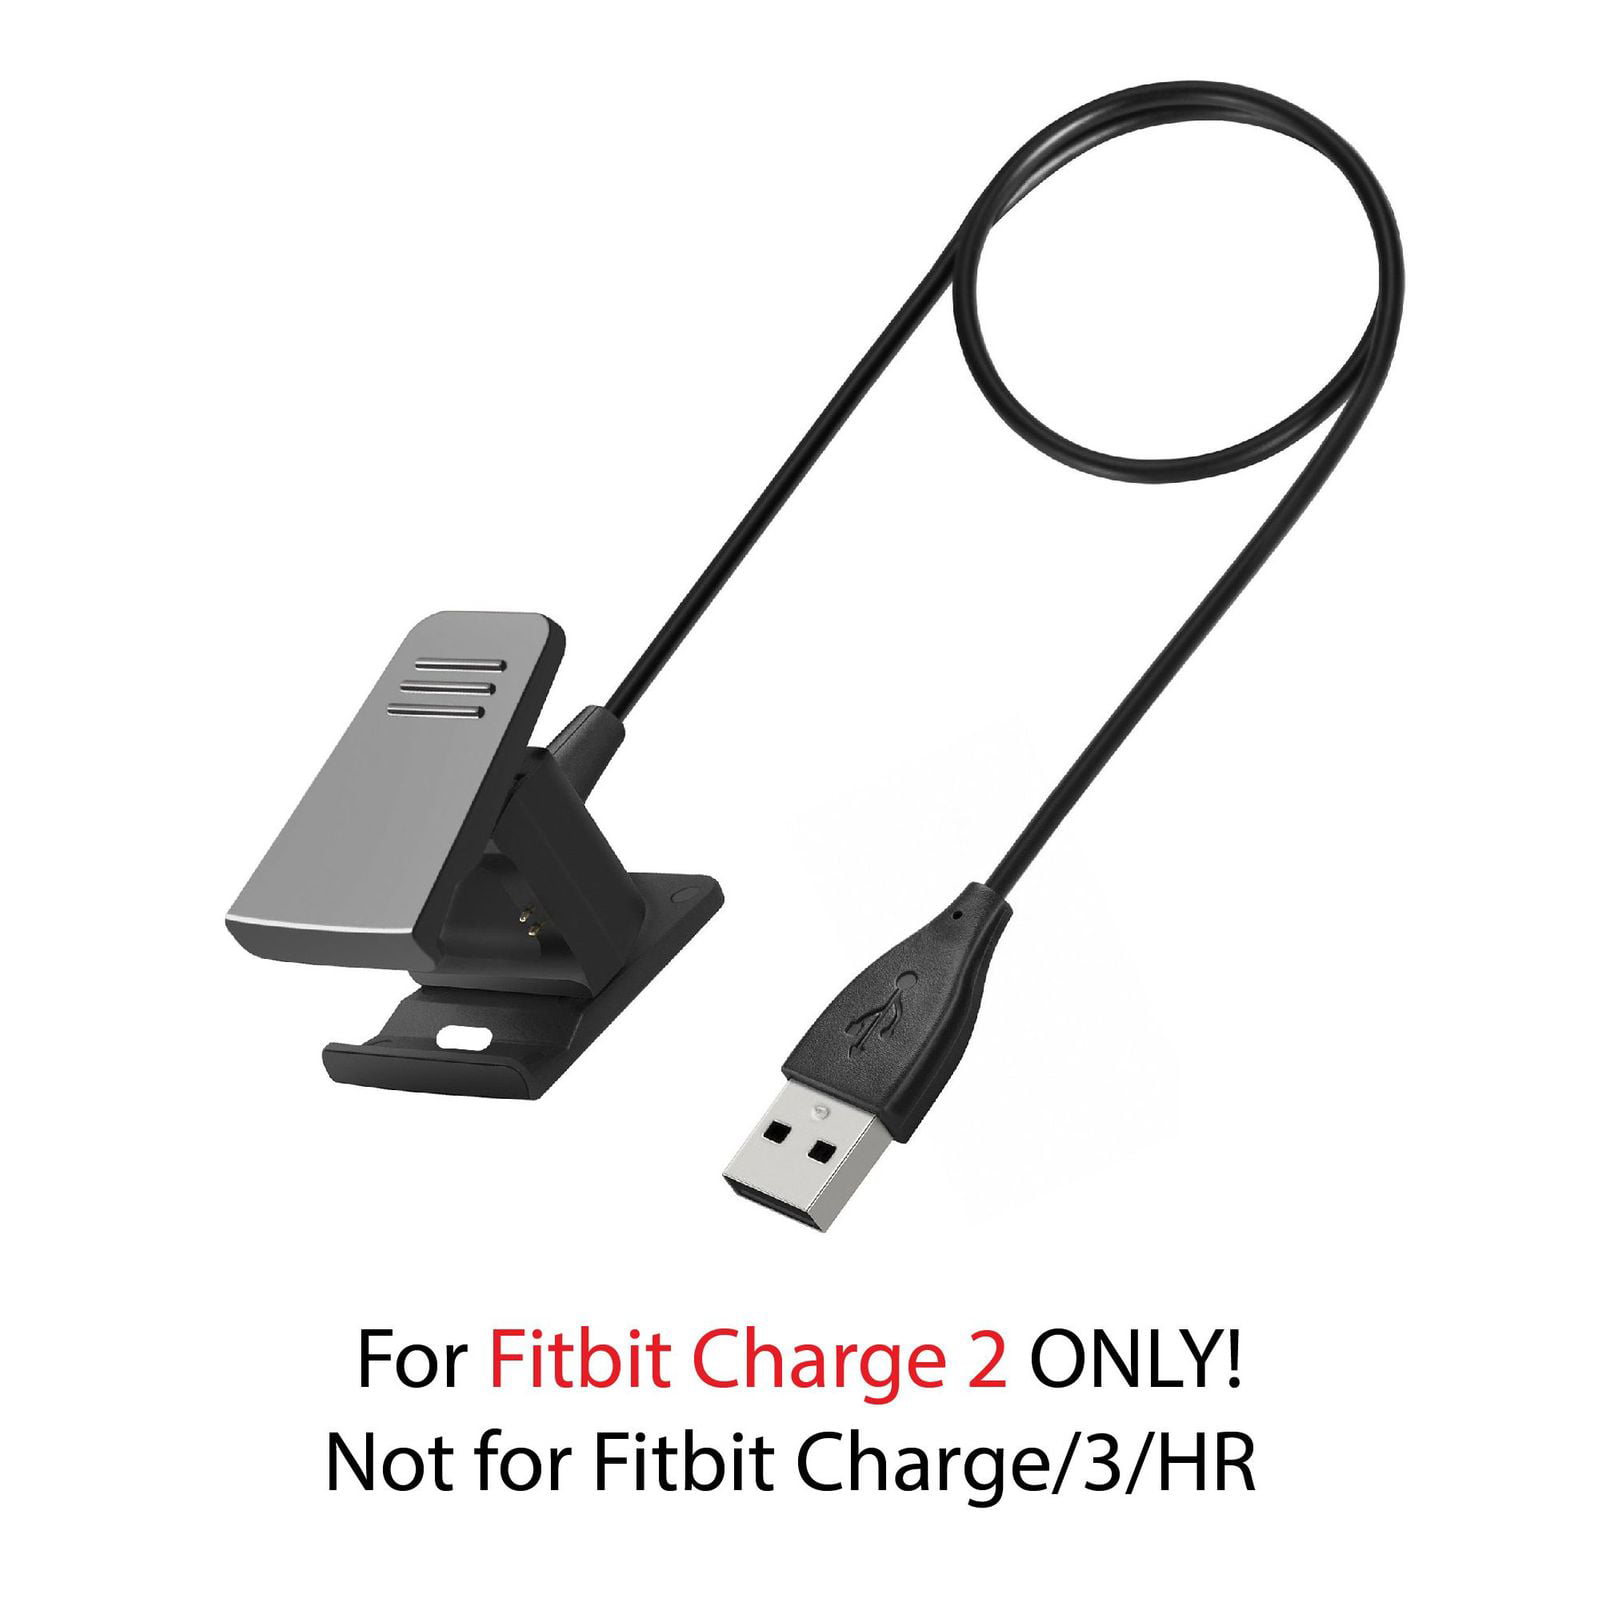 Insten 1 Feet USB Charging Cable Cord Replac... Fitbit Alta Replacement Charger 